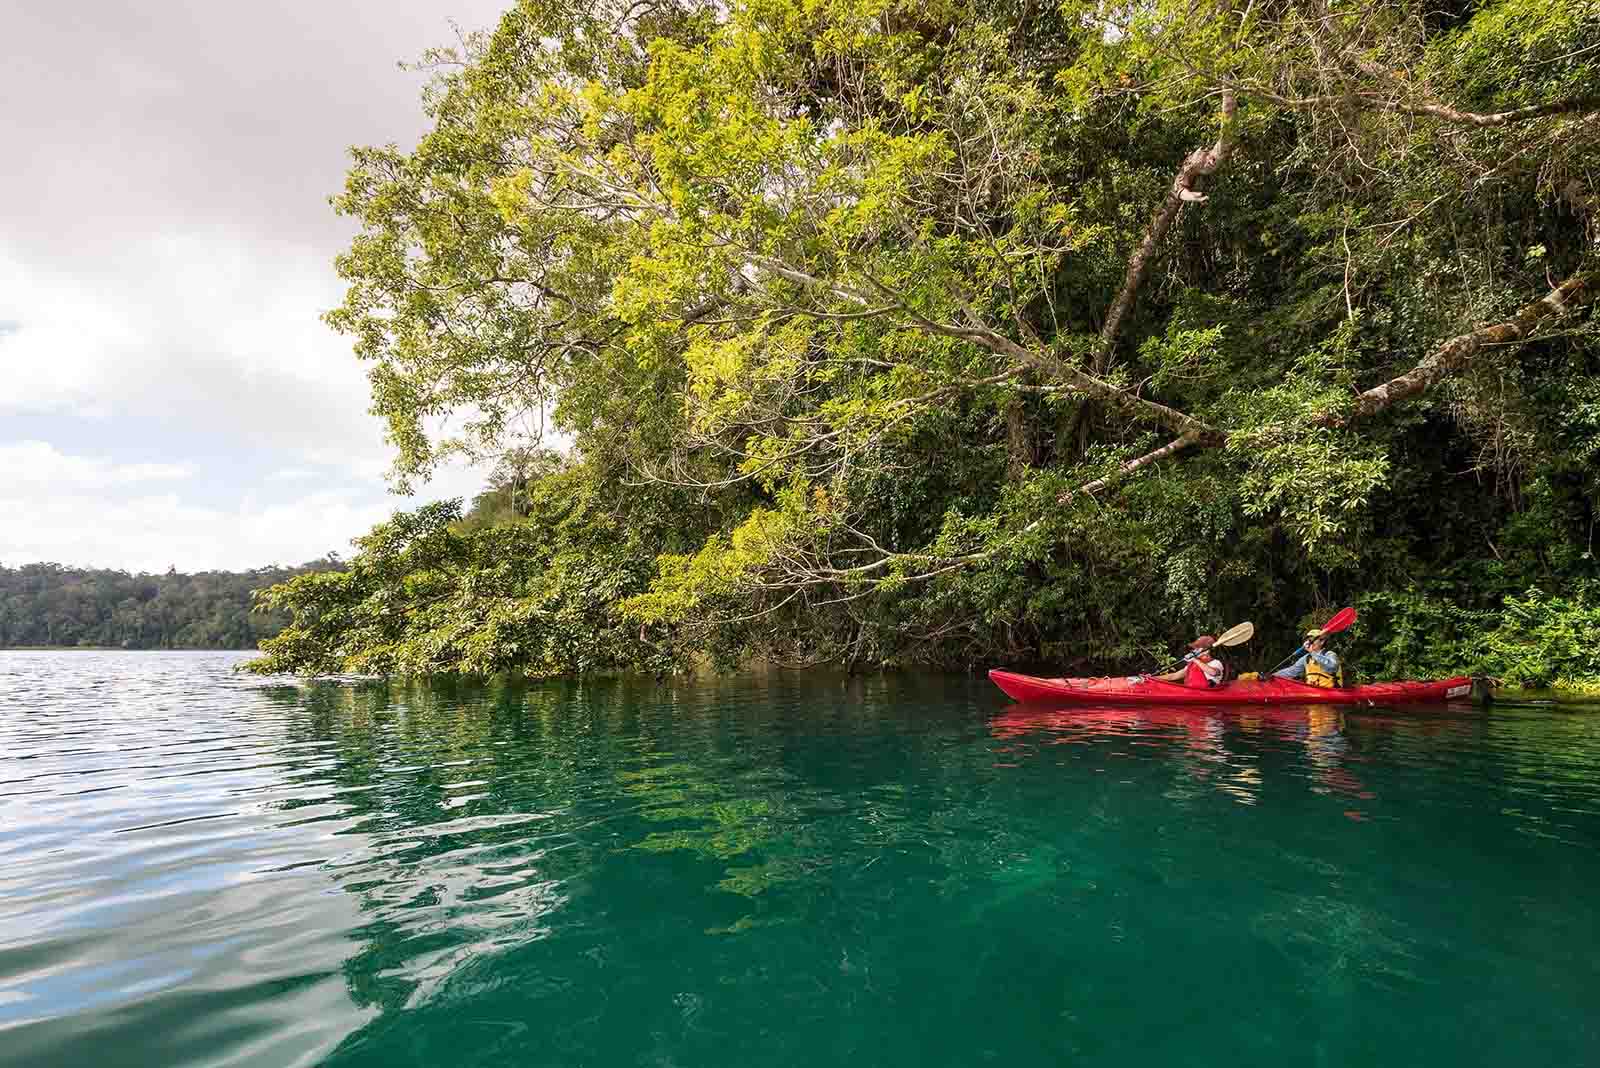 Lake Barrine is popular for hiking and kayaking | Discover Queensland's tropical tea trail